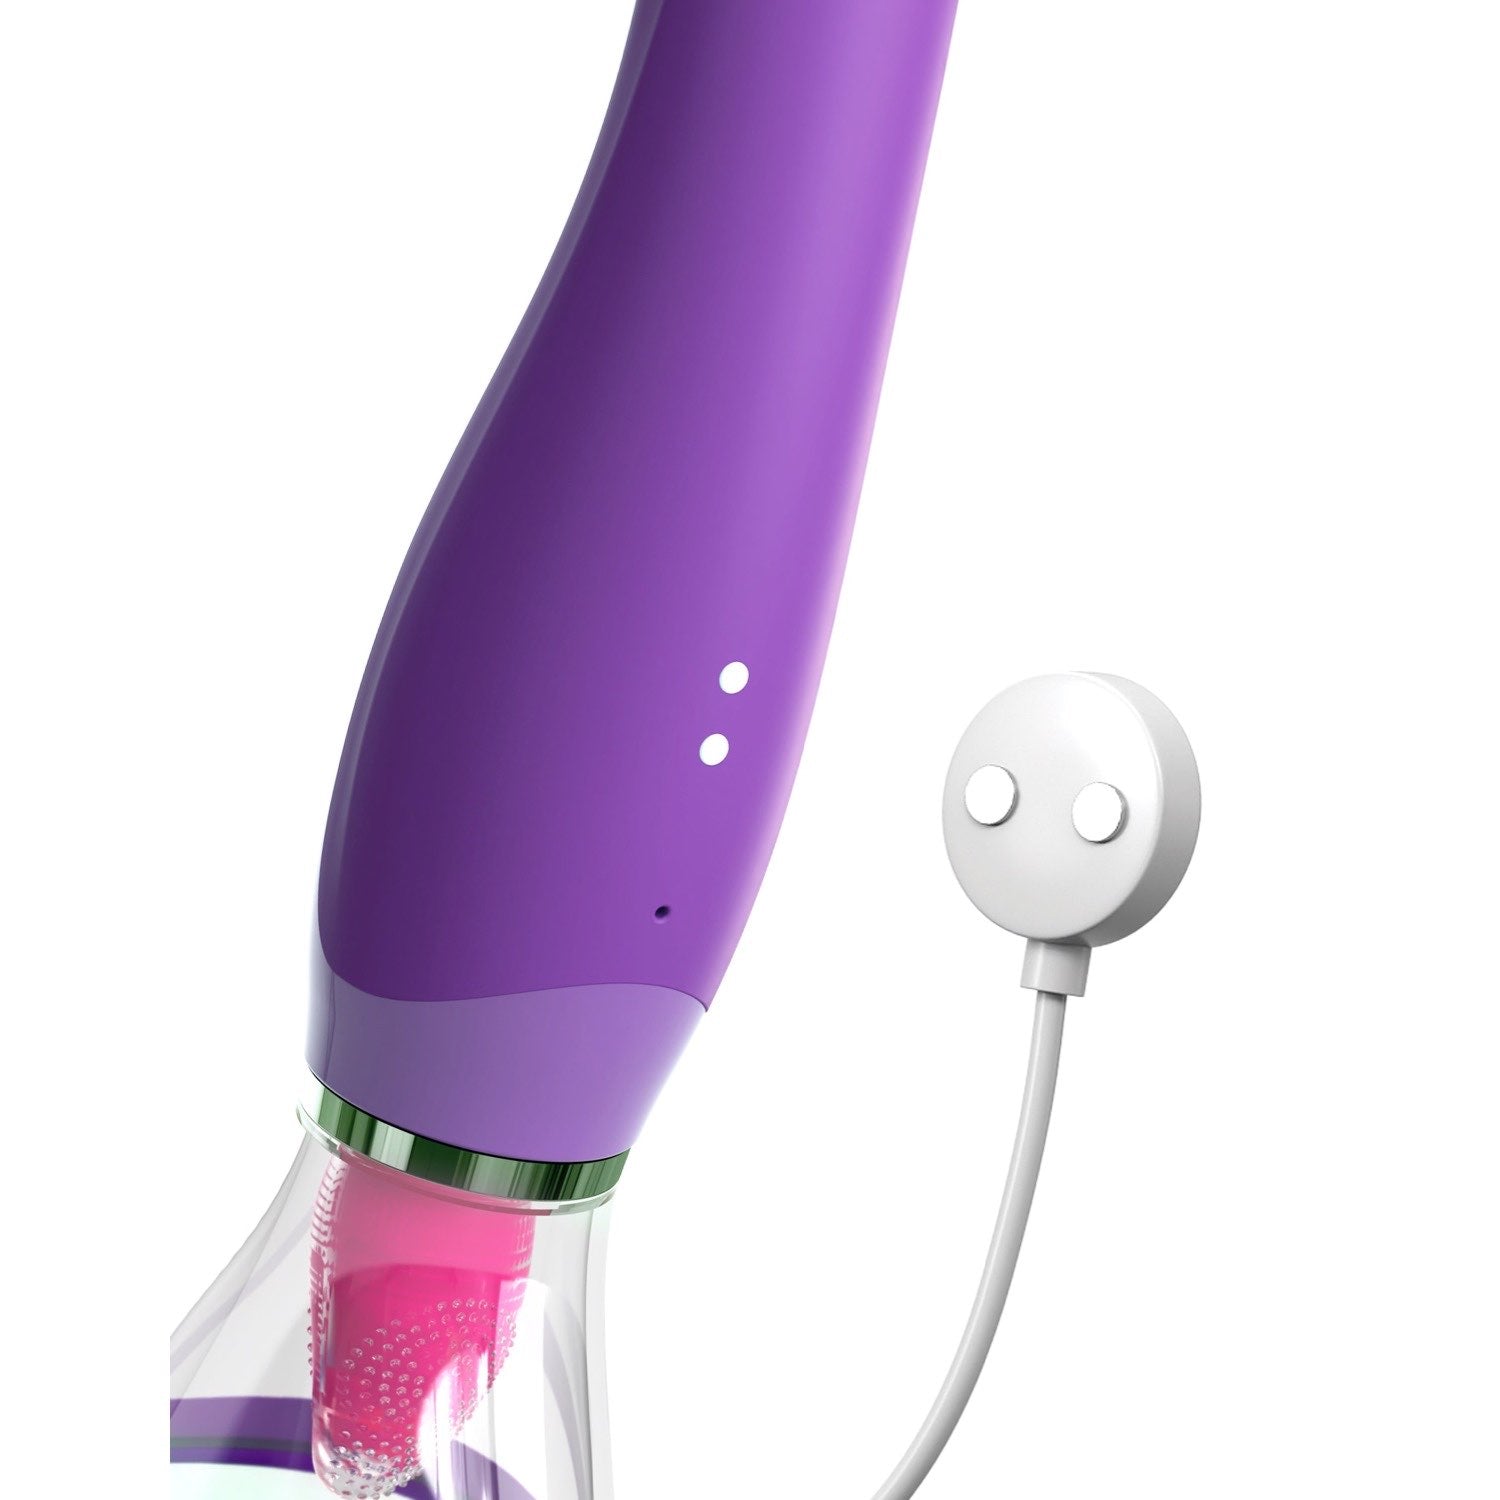 Fantasy For Her Ultimate Pleasure - Purple USB Rechargeable Sucking &amp; Flicking Stimulator by Pipedream